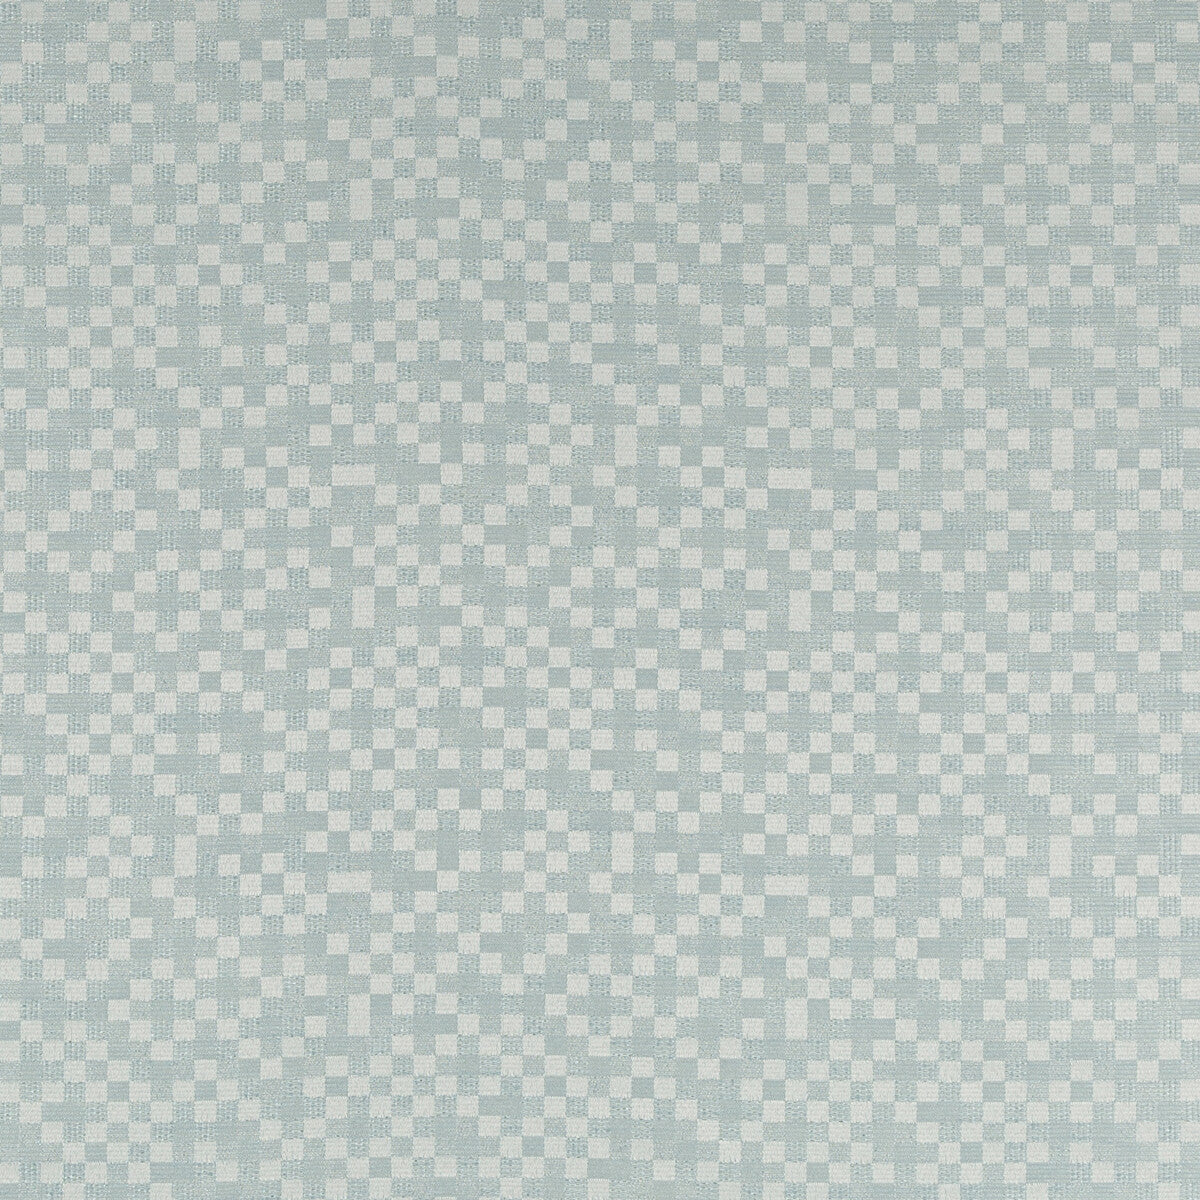 Levi fabric in sea green color - pattern 4658.135.0 - by Kravet Contract